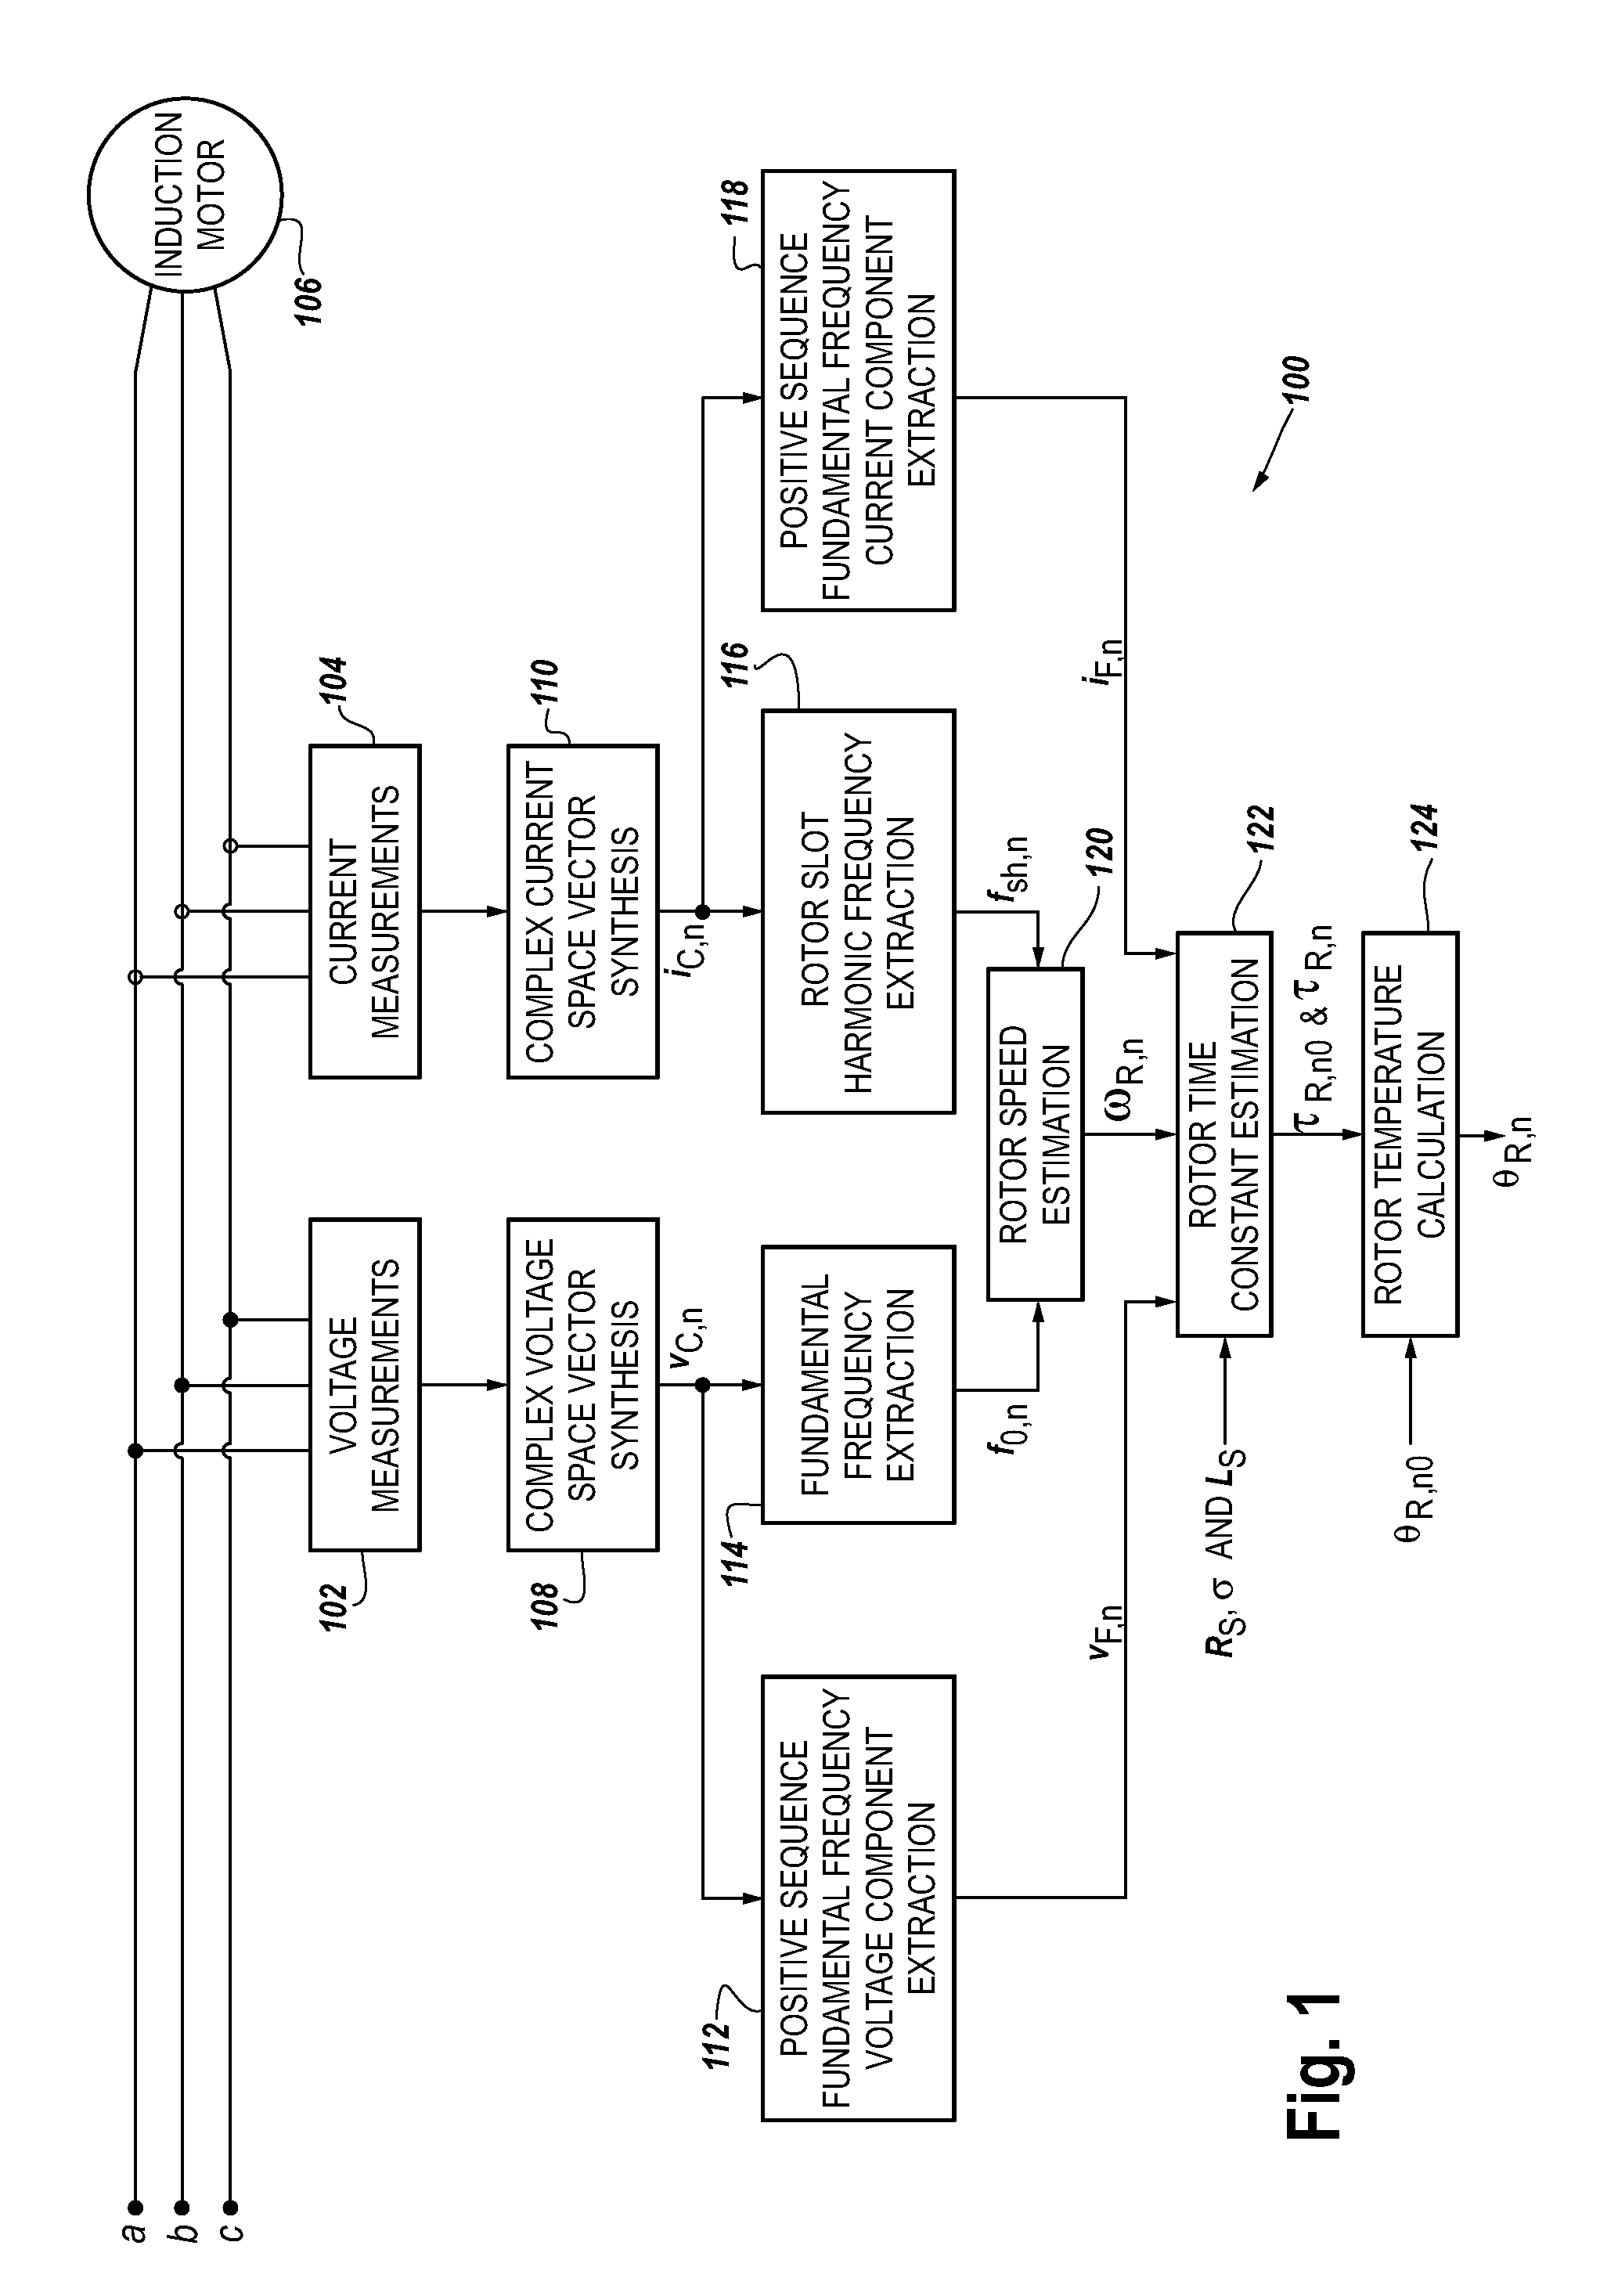 Method and apparatus for estimating induction motor electrical parameters